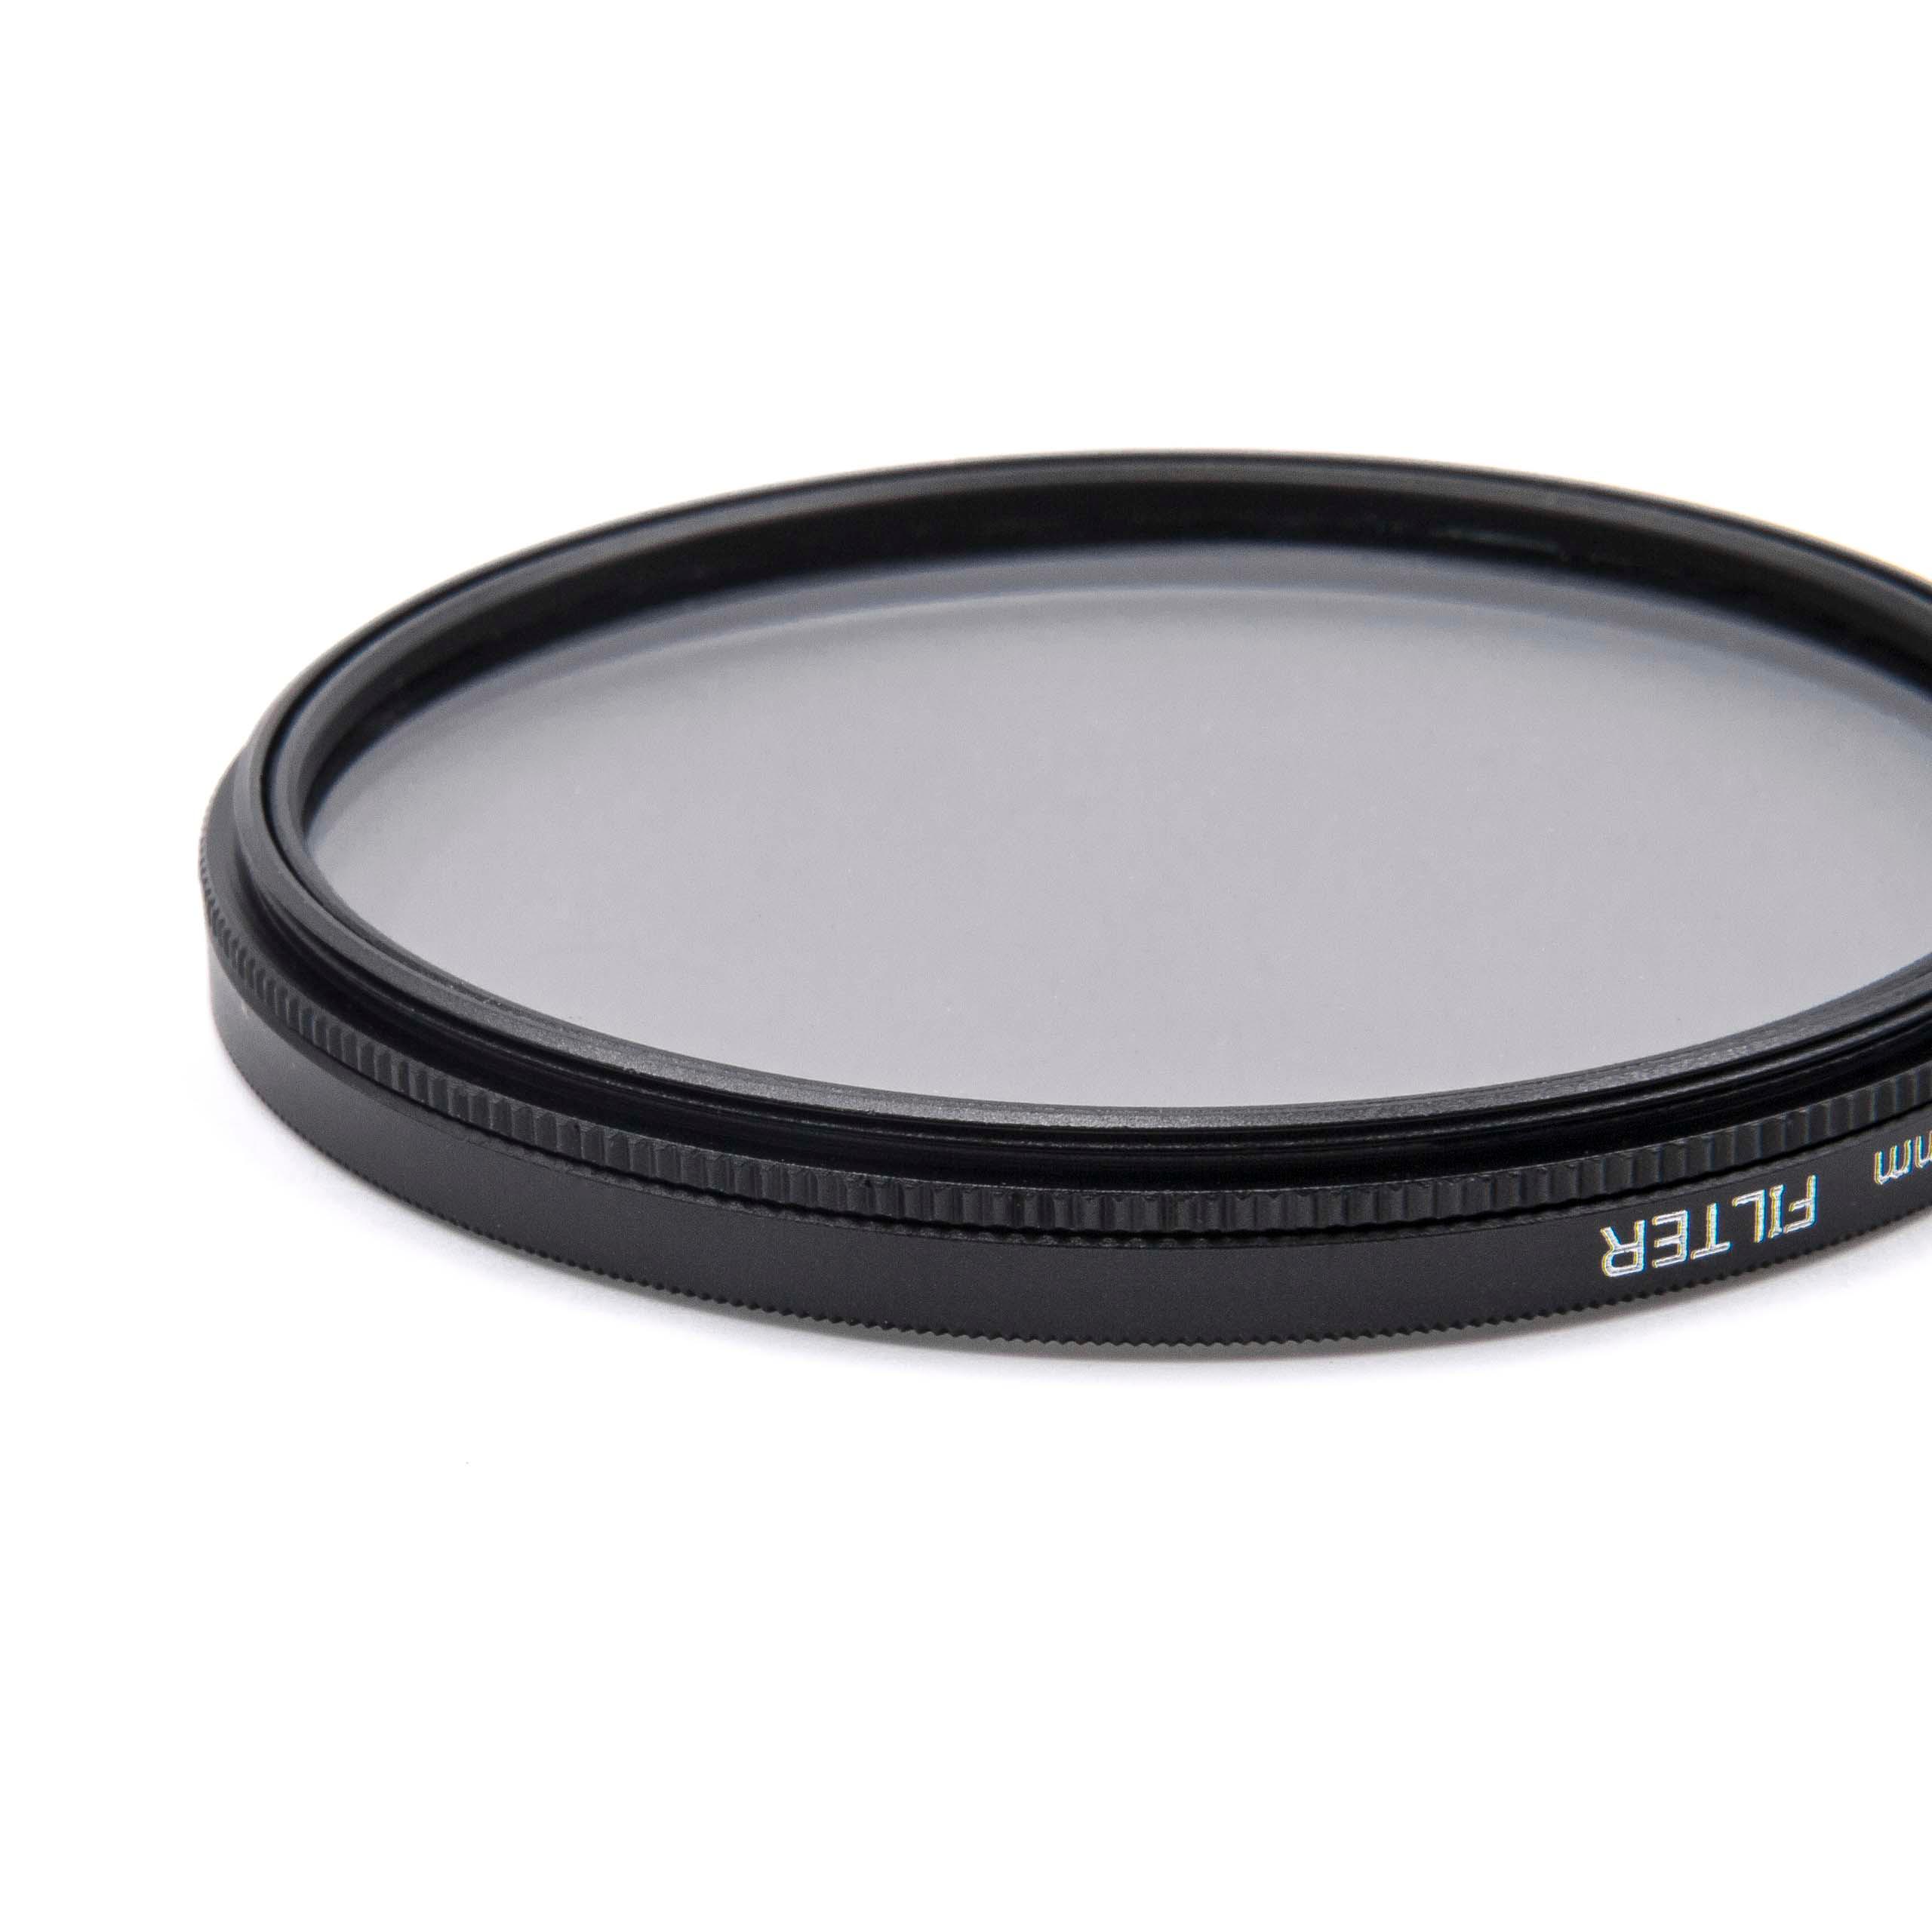 Polarising Filter suitable for Cameras & Lenses with 67 mm Filter Thread - CPL Filter